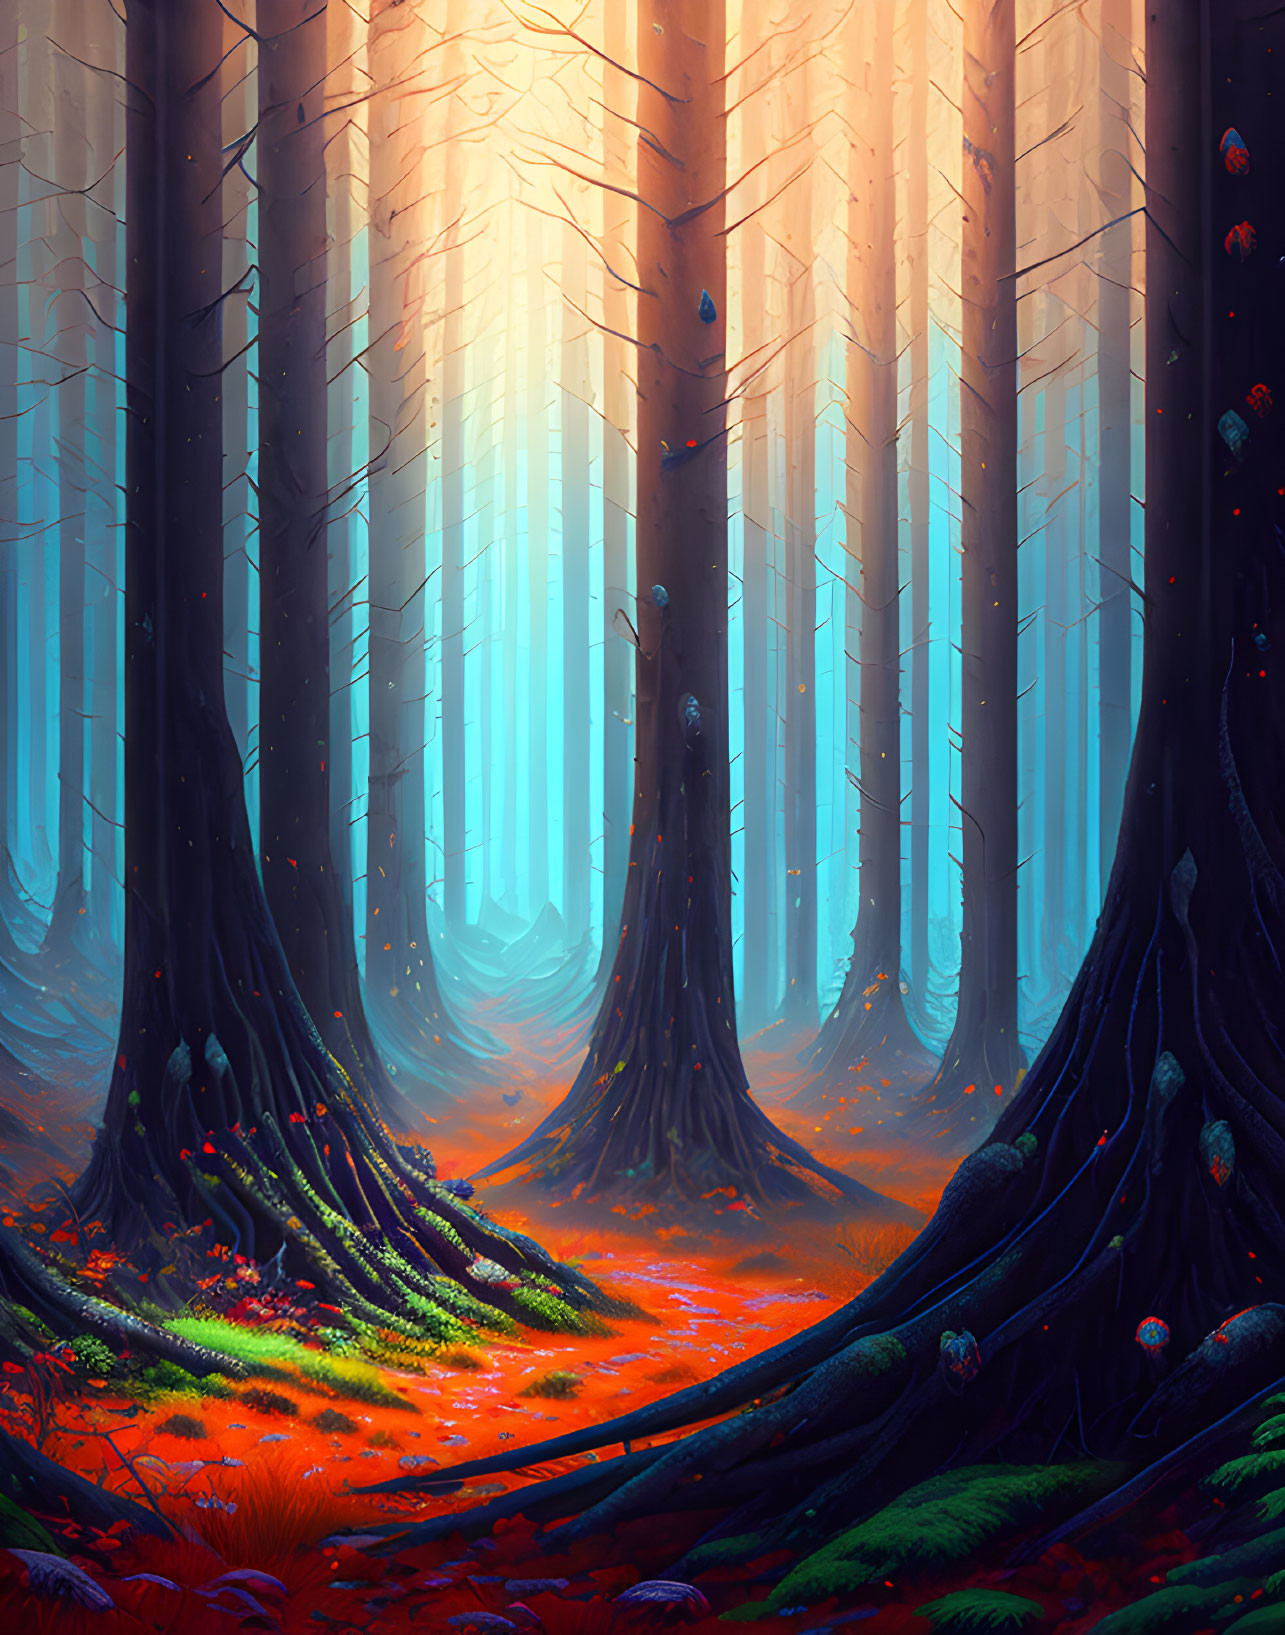 Mystical forest with towering trees and vibrant red-orange forest floor